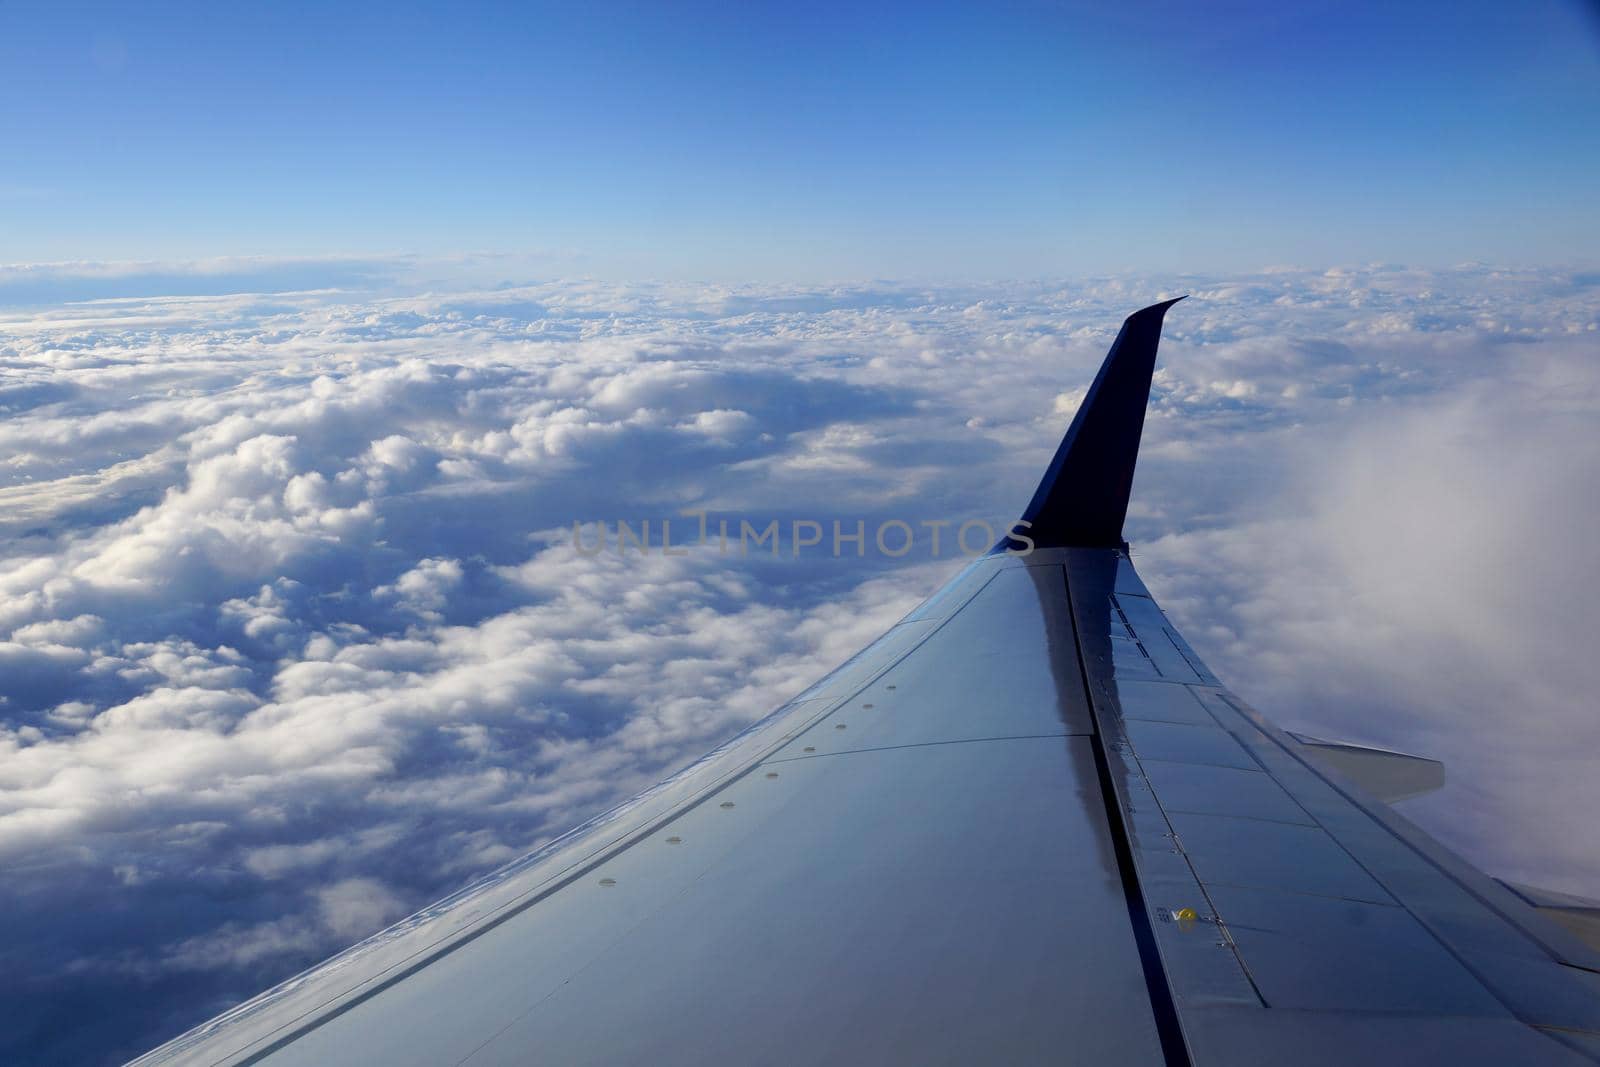 Aerial high in the sky, shot from above the clouds, with the wing of a commercial jet plane that turns upwards on the right side and blue skys.